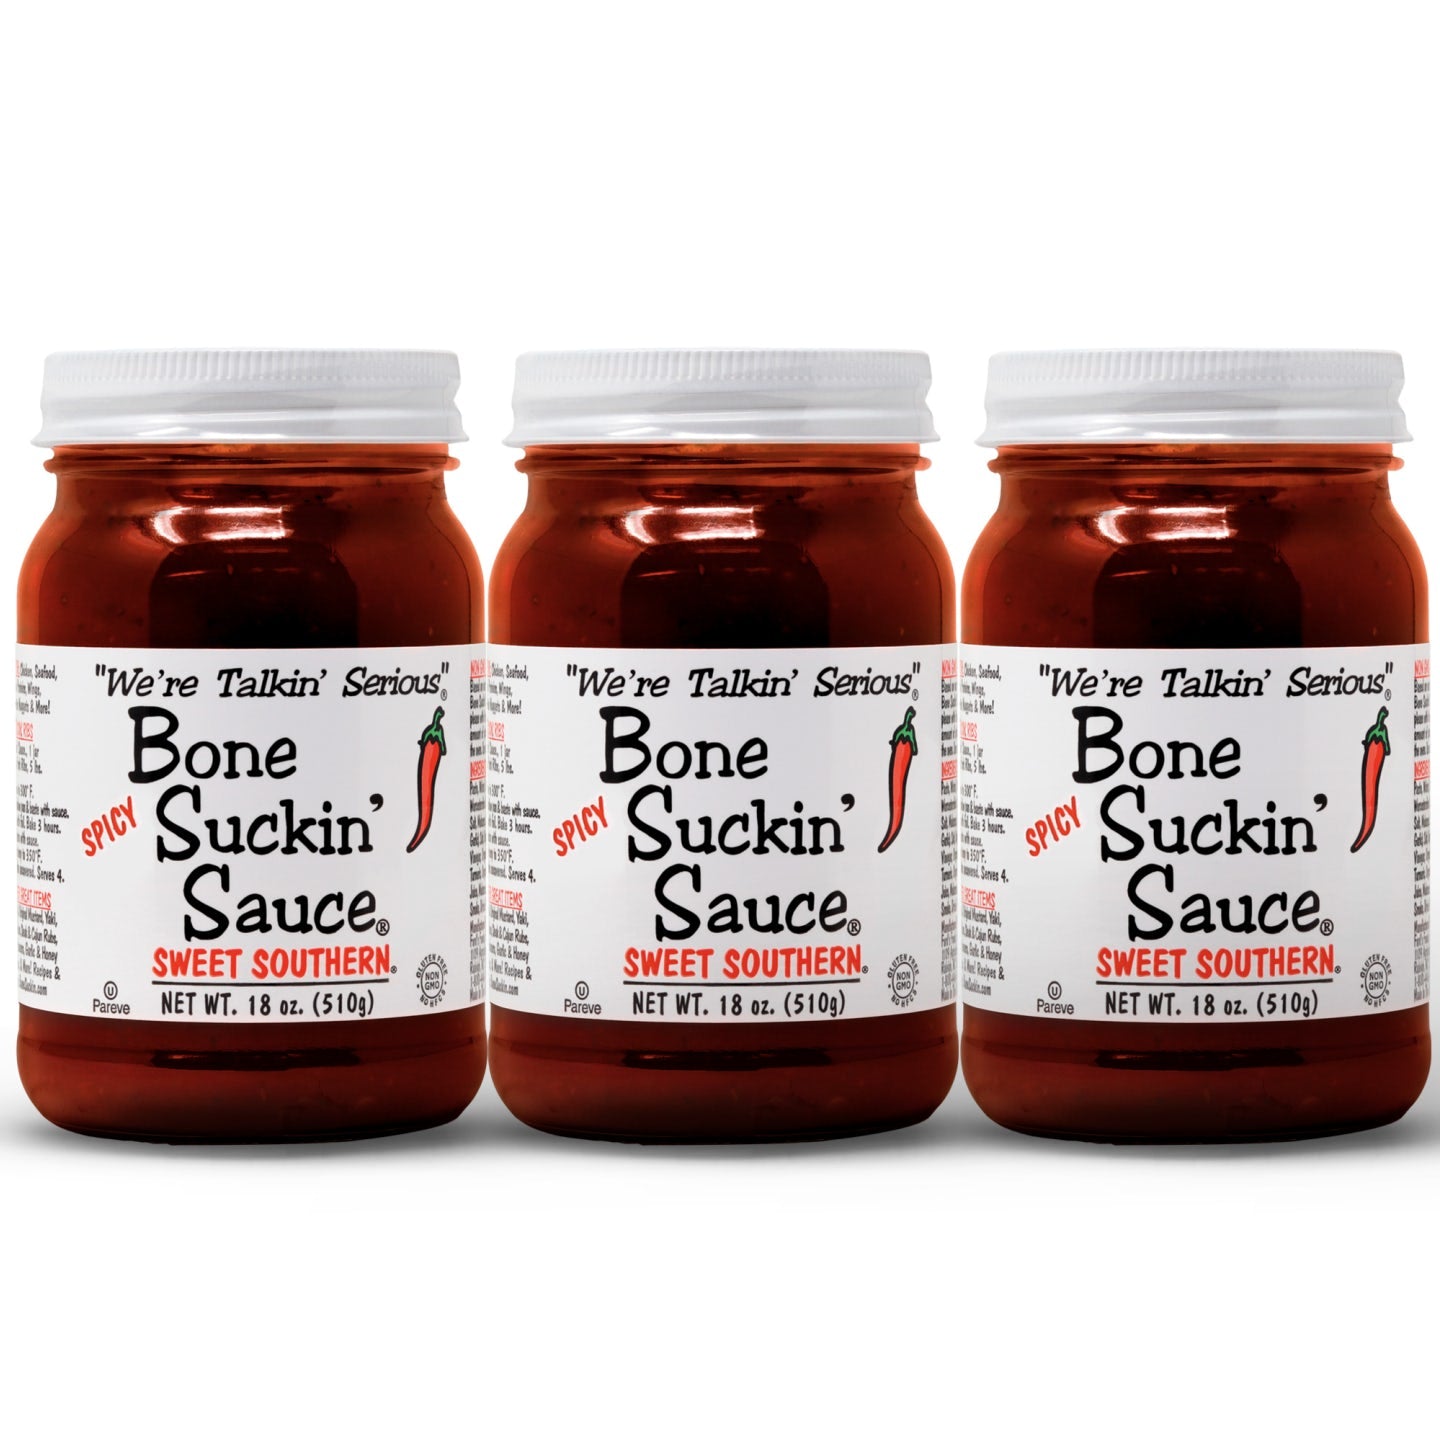 Bone Suckin' Sauce Sweet Southern Spicy BBQ Sauce - 18 oz in Glass Bottle, For Ribs, Chicken, Pork, Beef - Gluten-Free, Non-GMO, Kosher, Spicy Barbecue Sauce Sweetened with Cane Sugar & Molasses. 3 pack